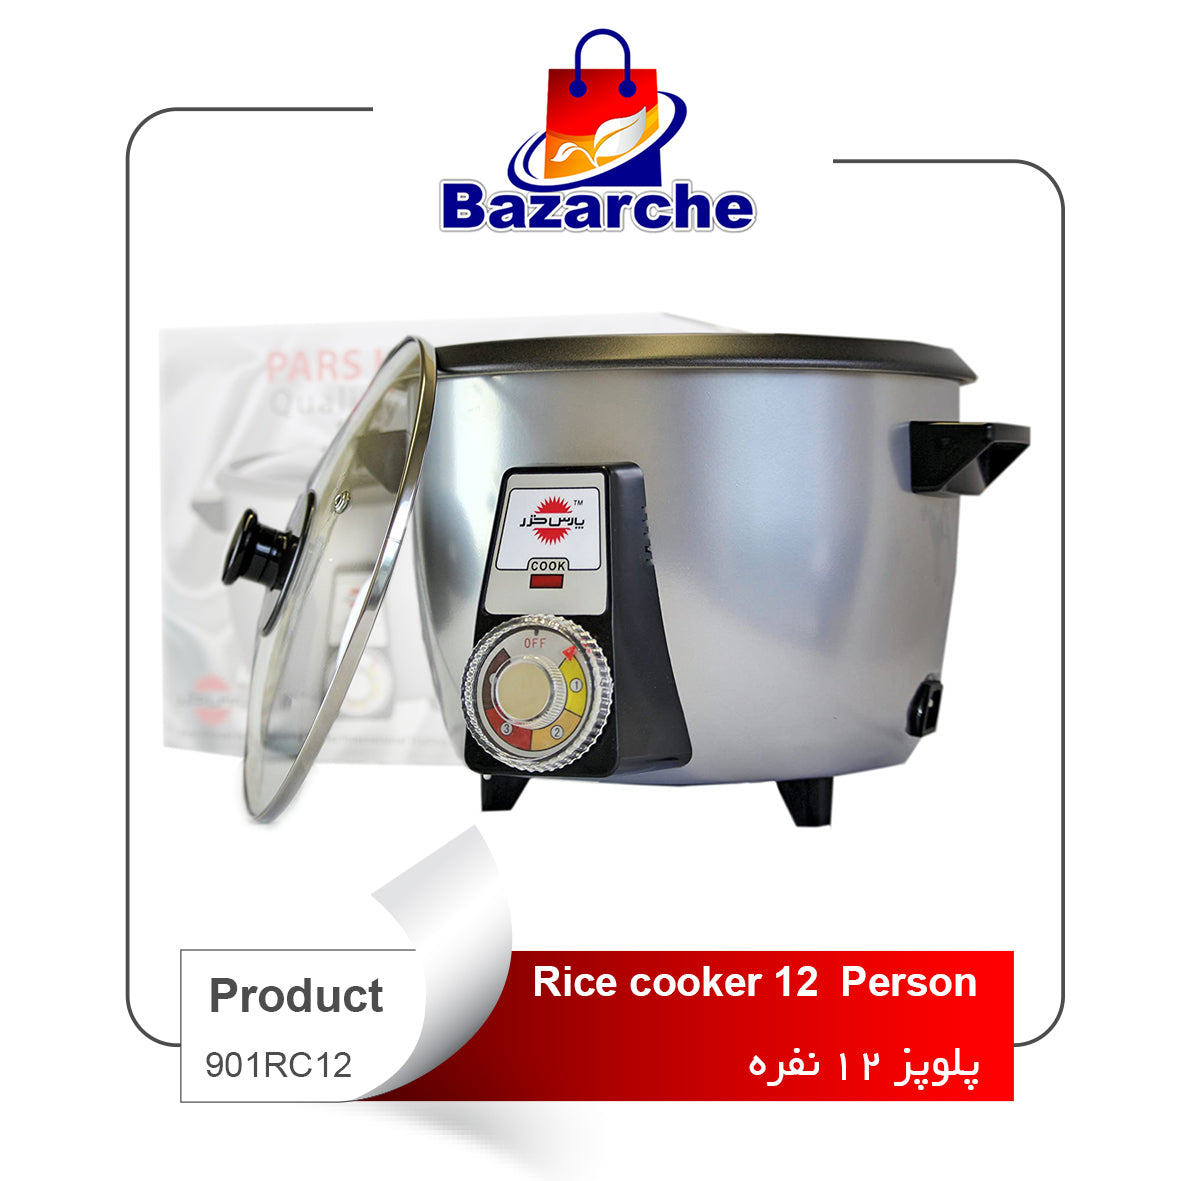 Rice cooker 12  Person ( پلوپز ۱۲نفره)